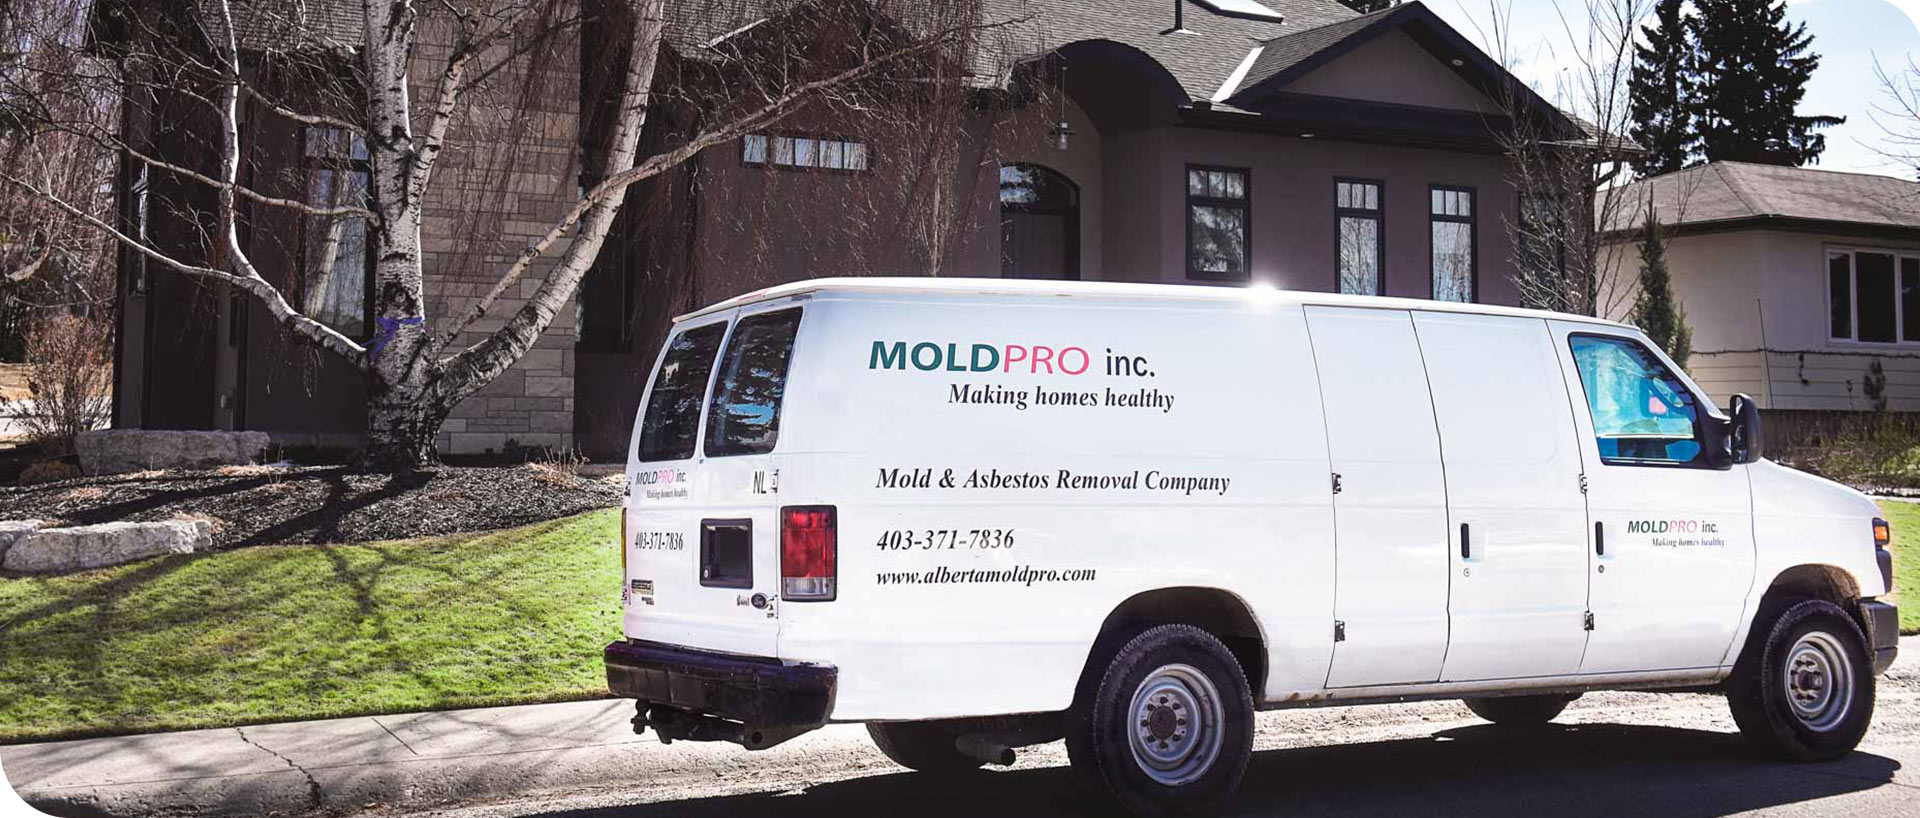 Mold Pro Team in Action | MoldPro | Alberta Asbestos and Mold Removal Specialists